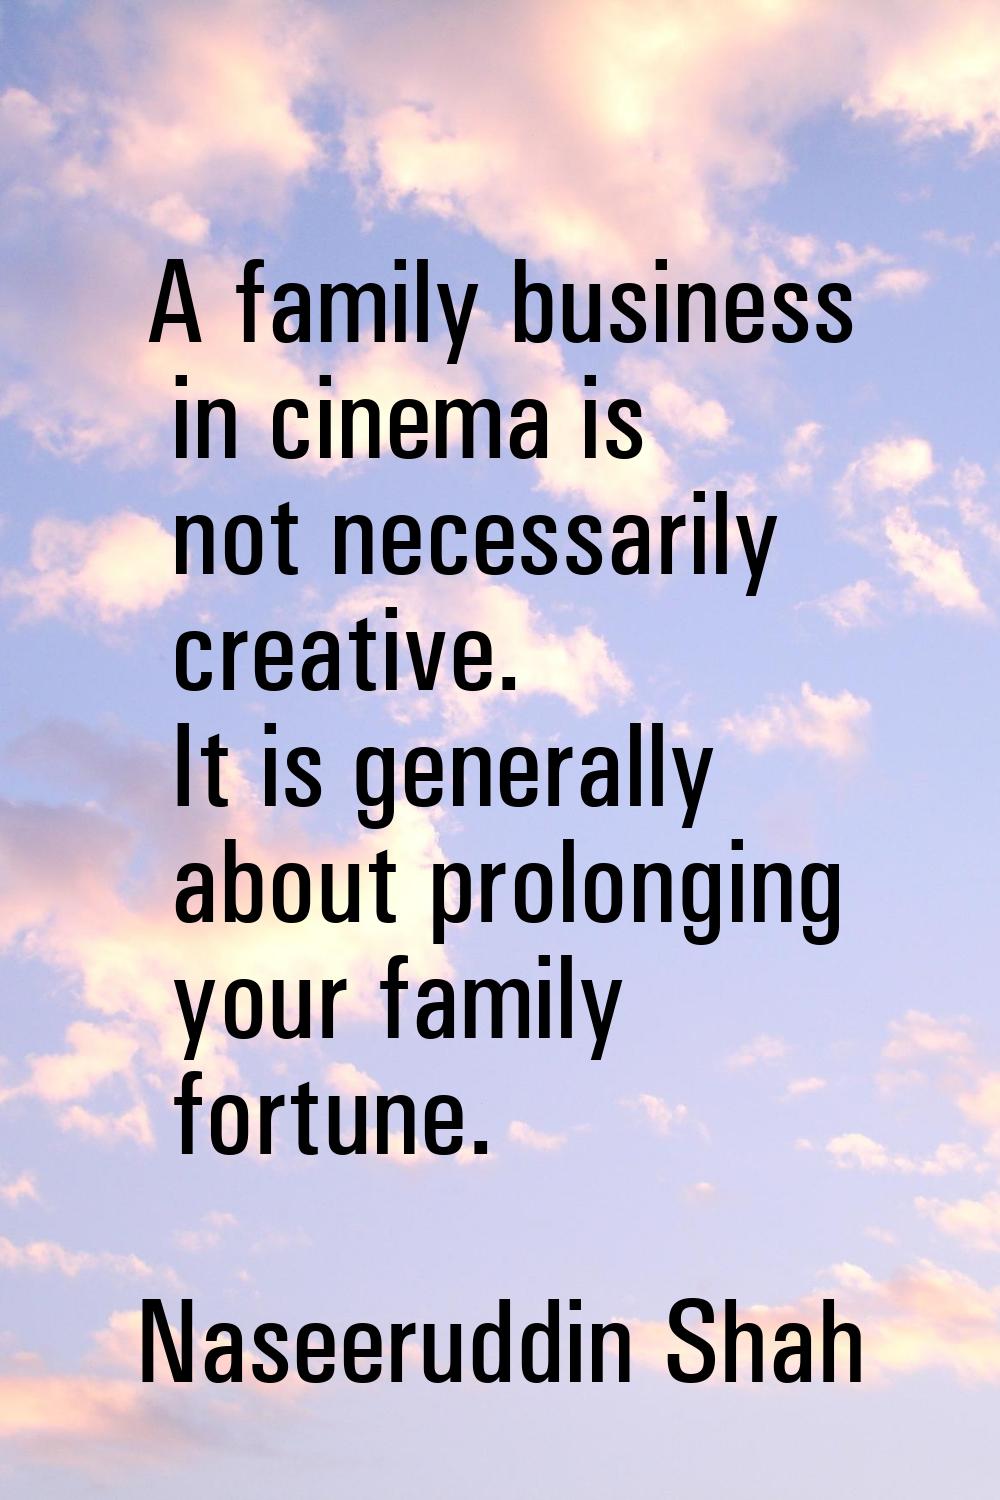 A family business in cinema is not necessarily creative. It is generally about prolonging your fami